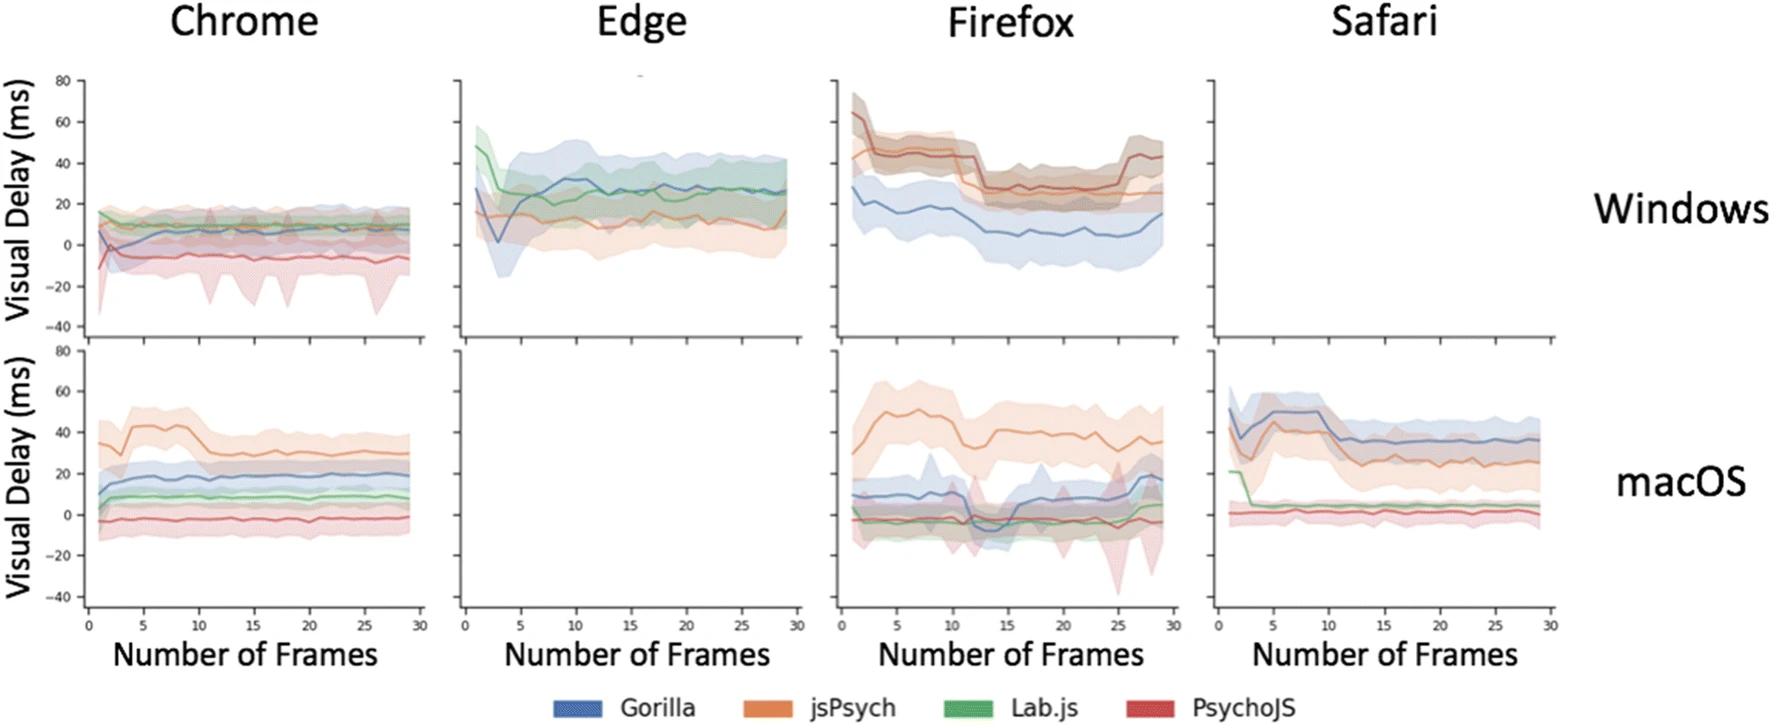 Graphs plotting the Visual Delay against the Number of Frames for the browsers Chrome, Edge, Firefox and Safari and the platforms Gorilla, jsPsych, Lab.js and PsychoJS